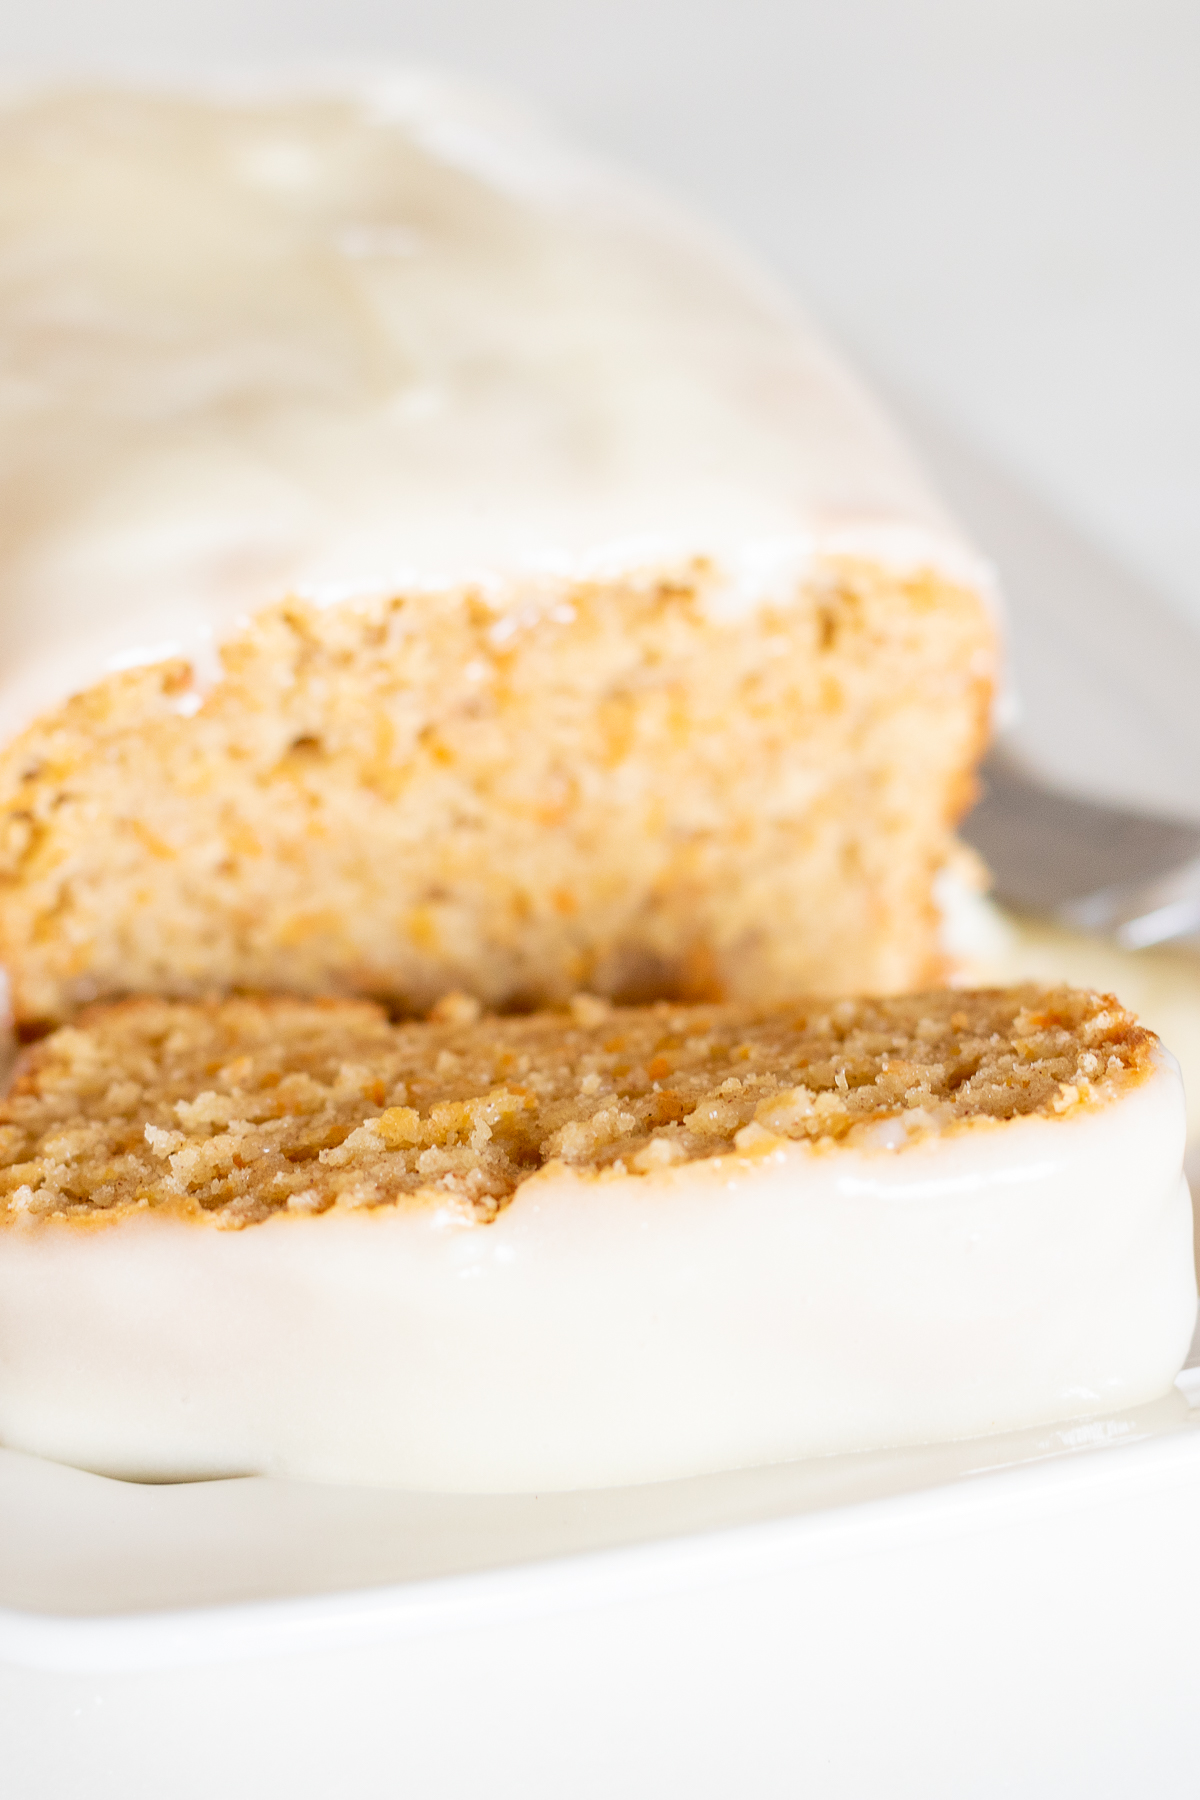 A carrot cake loaf topped with cream cheese glaze